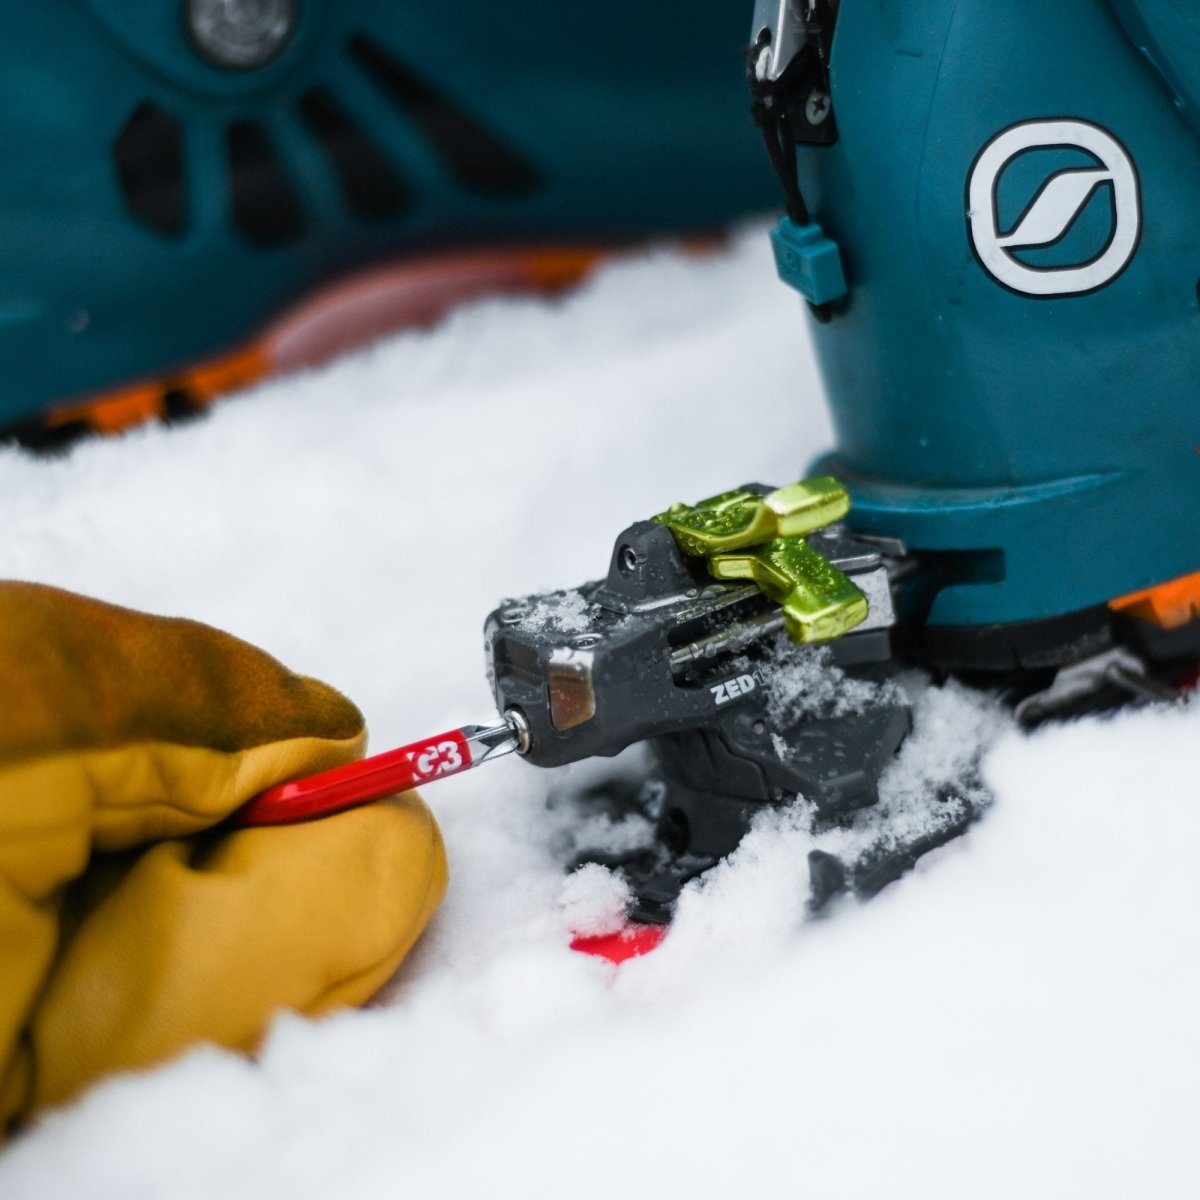 Backcountry Binding Tool - Accessories - G3 Store [CAD]